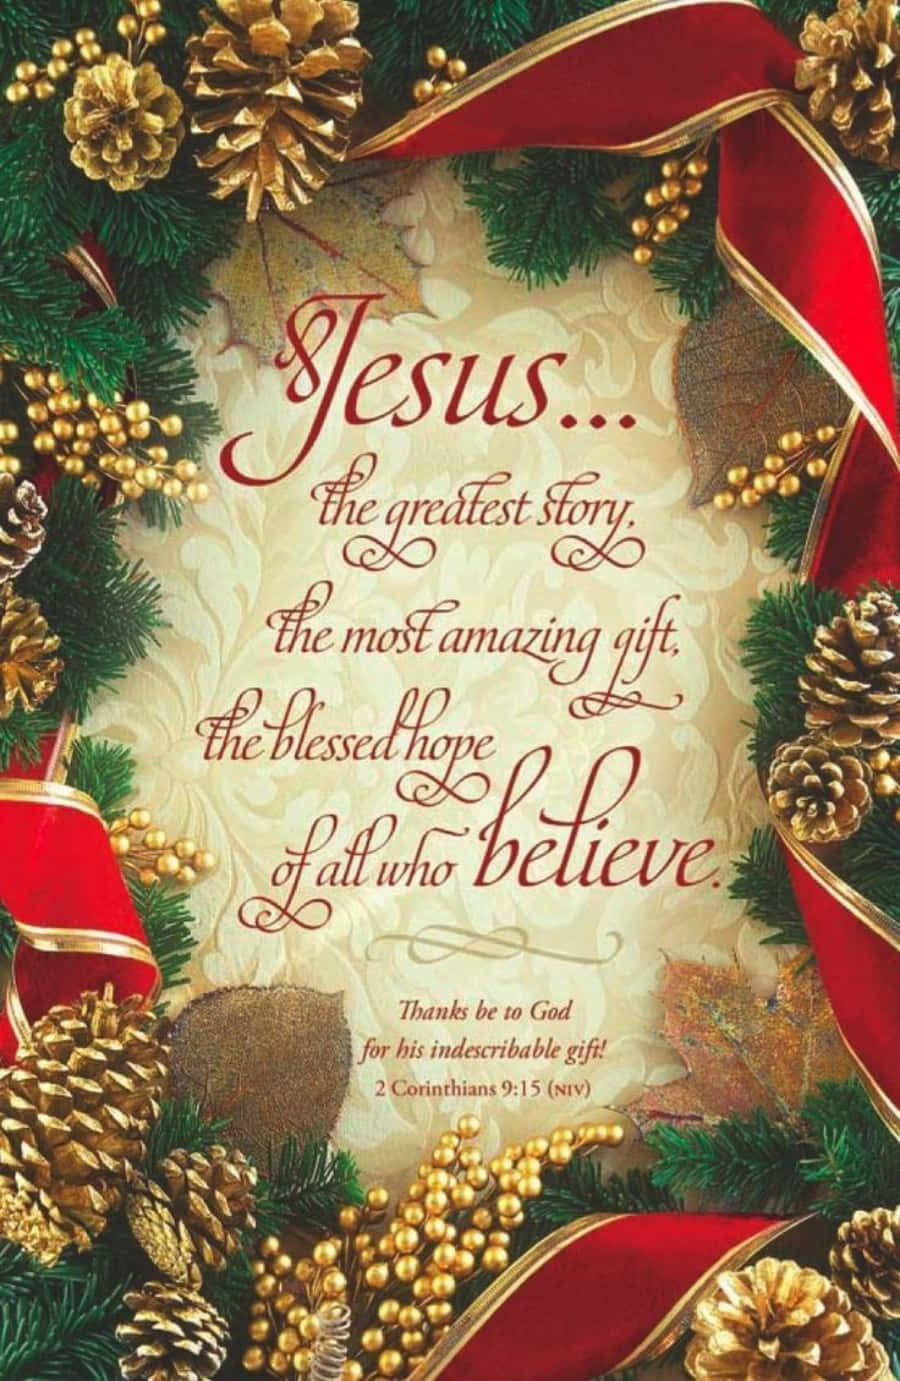 The true meaning of Christmas can be found in the Bible. Wallpaper